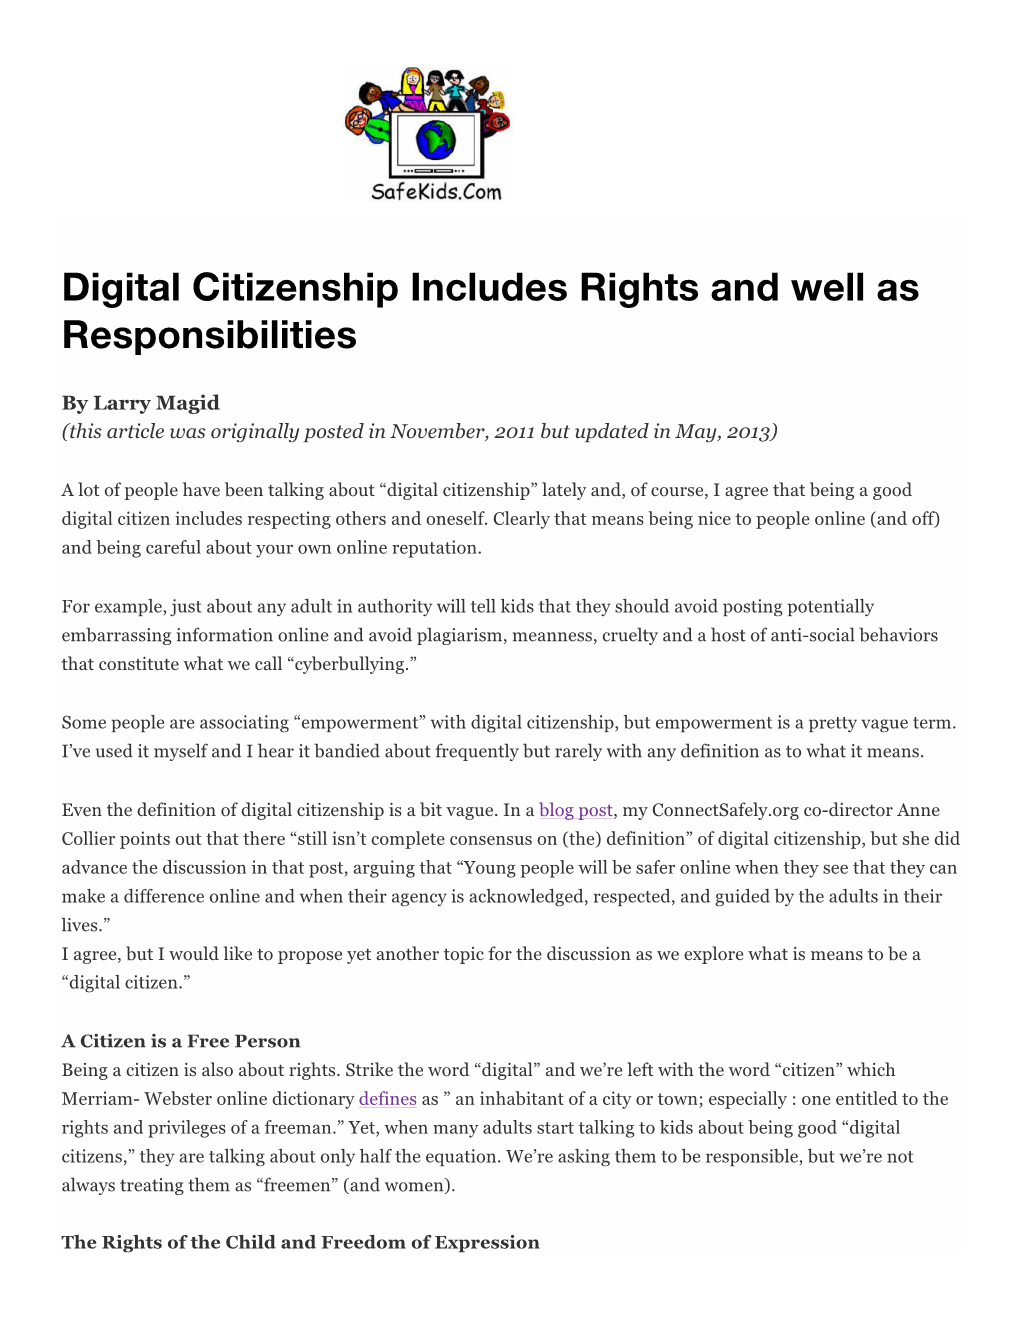 Digital Citizenship Includes Rights and Well As Responsibilities